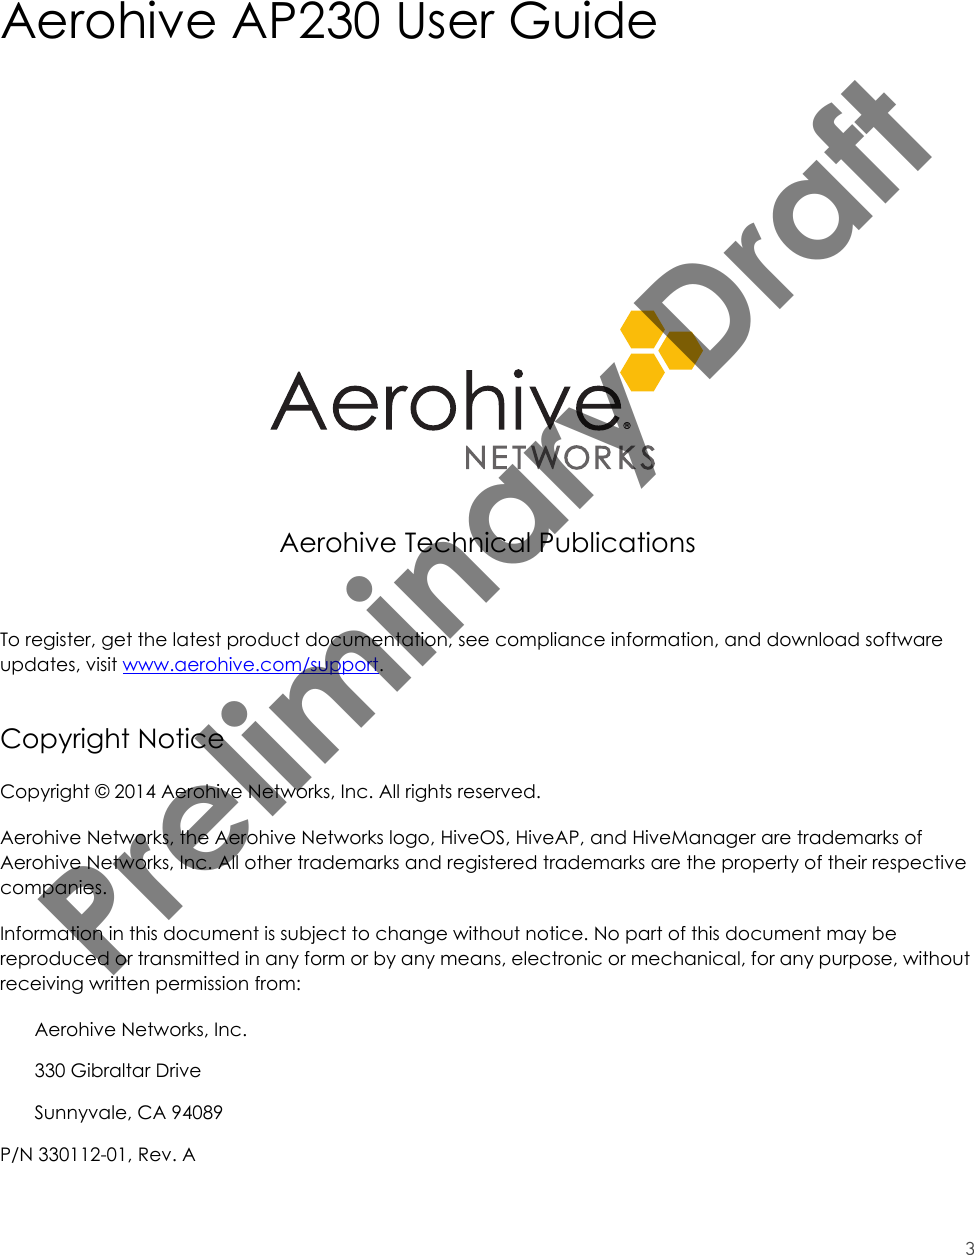 3Aerohive AP230 User GuideAerohive Technical PublicationsTo register, get the latest product documentation, see compliance information, and download software updates, visit www.aerohive.com/support.Copyright NoticeCopyright © 2014 Aerohive Networks, Inc. All rights reserved.Aerohive Networks, the Aerohive Networks logo, HiveOS, HiveAP, and HiveManager are trademarks of Aerohive Networks, Inc. All other trademarks and registered trademarks are the property of their respective companies.Information in this document is subject to change without notice. No part of this document may be reproduced or transmitted in any form or by any means, electronic or mechanical, for any purpose, without receiving written permission from:Aerohive Networks, Inc.330 Gibraltar DriveSunnyvale, CA 94089P/N 330112-01, Rev. APreliminary Draft 